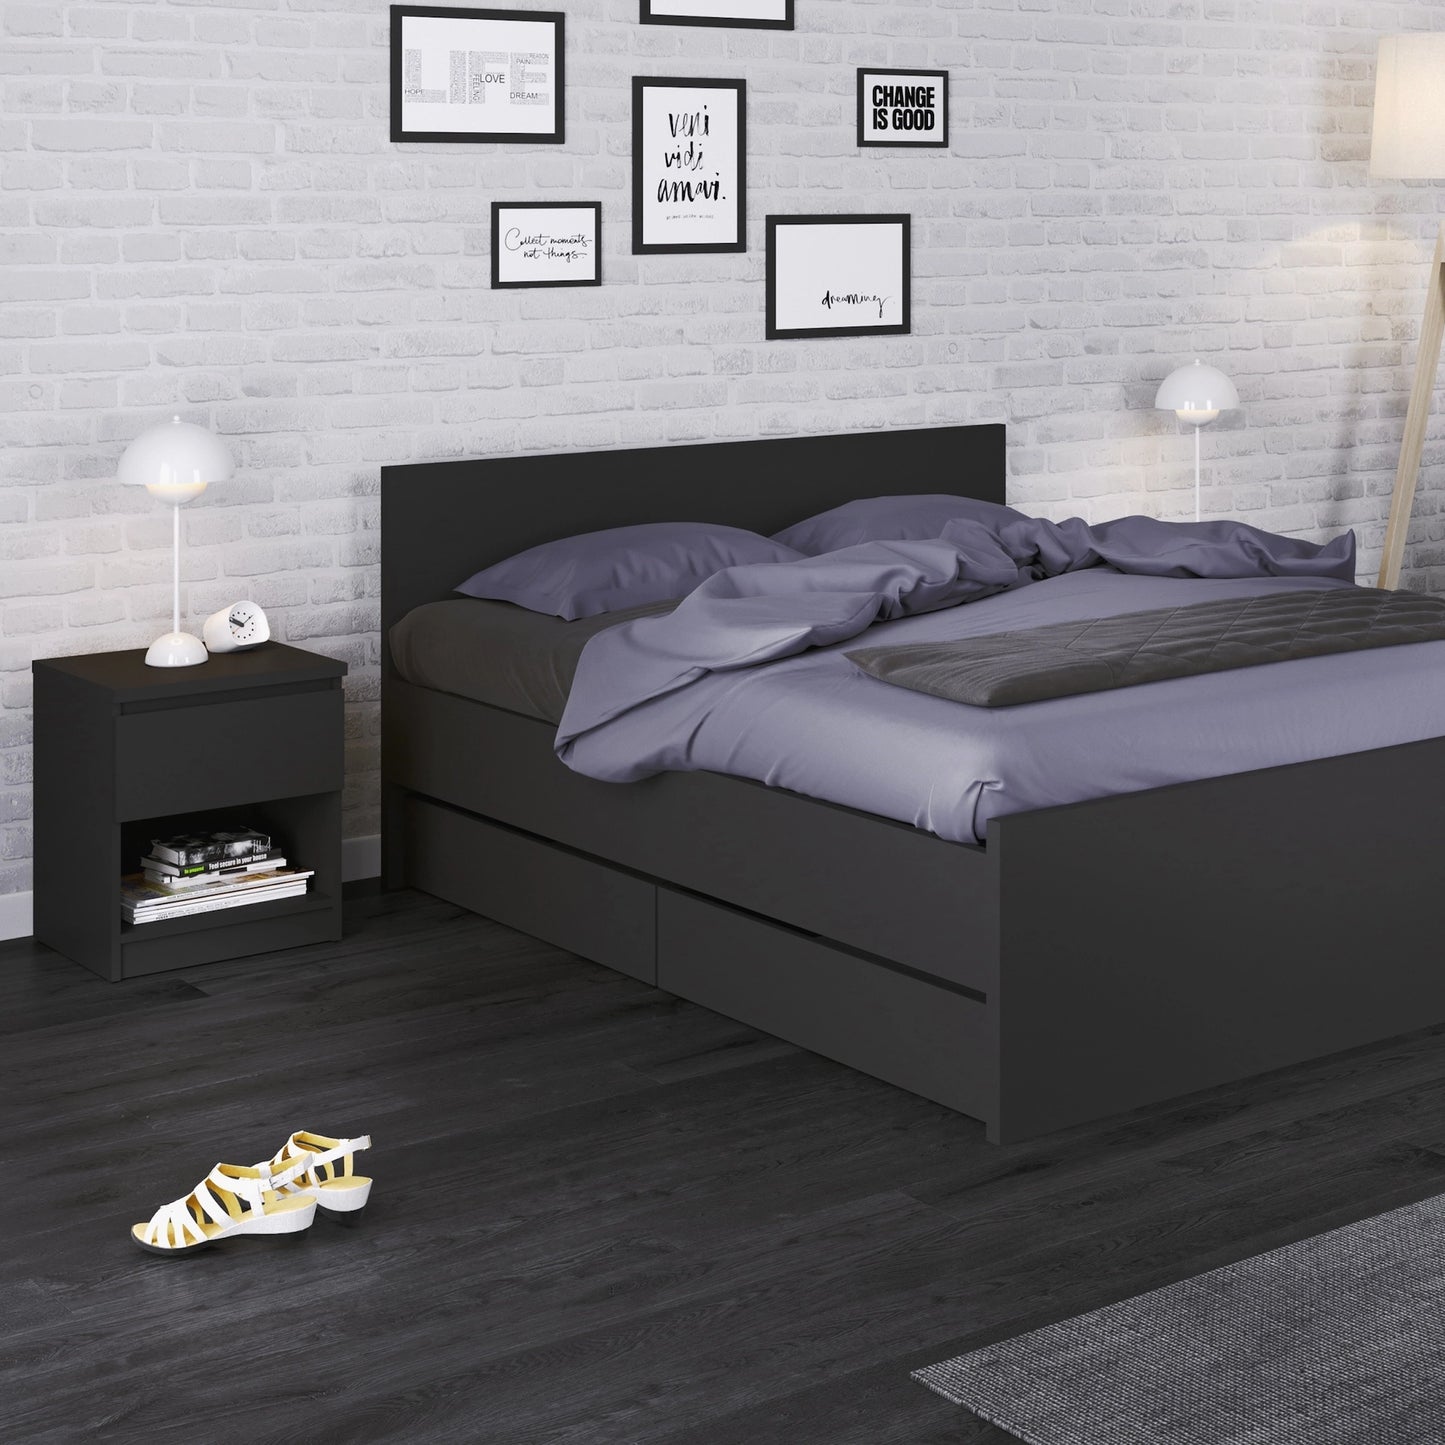 Furniture To Go Naia 4ft 6in Double Bed in Black Matt